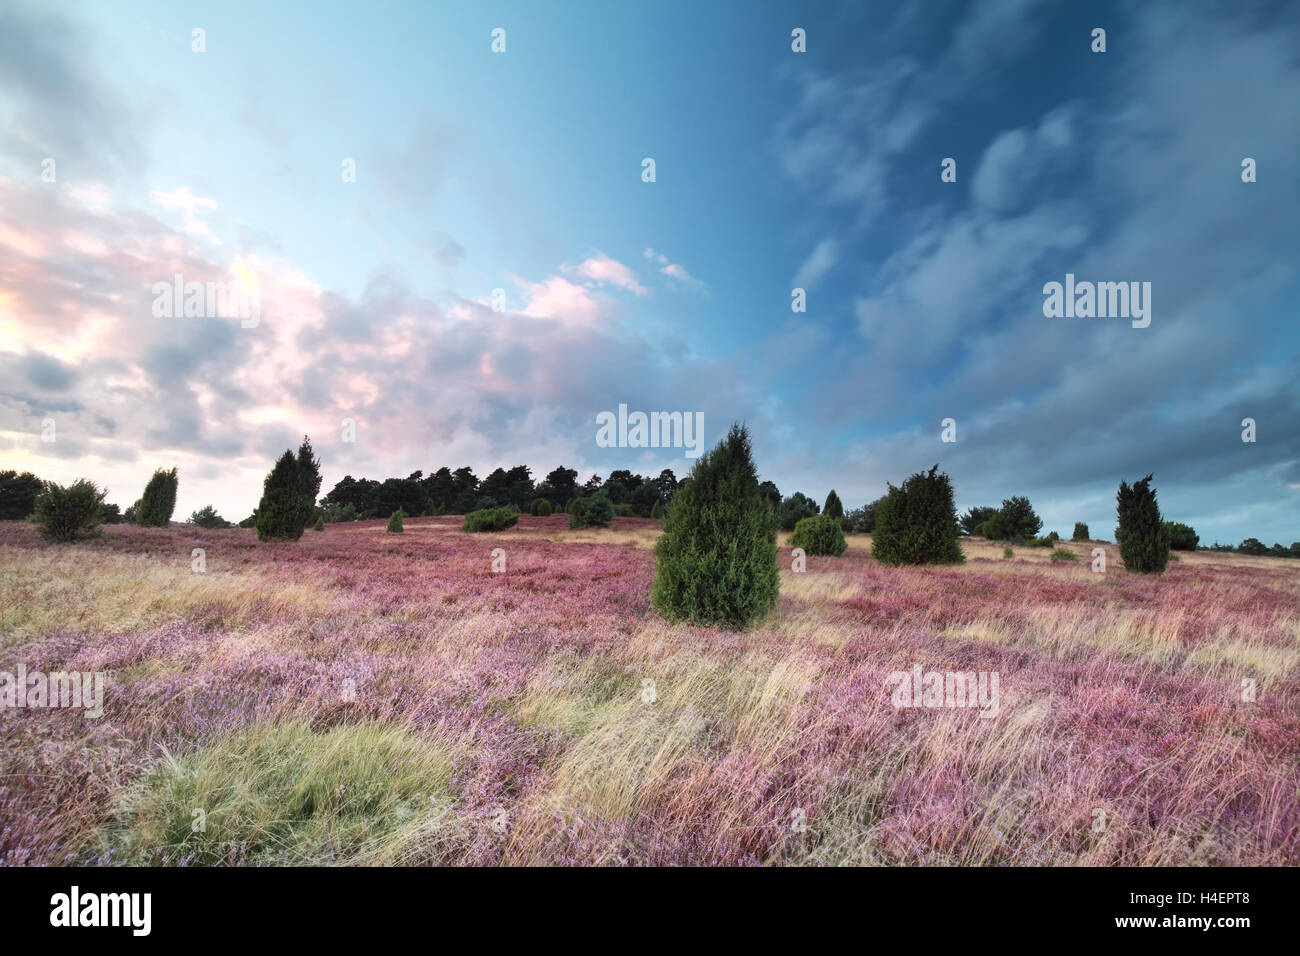 pink flowering heather at sunset, Wilsede, Germany Stock Photo